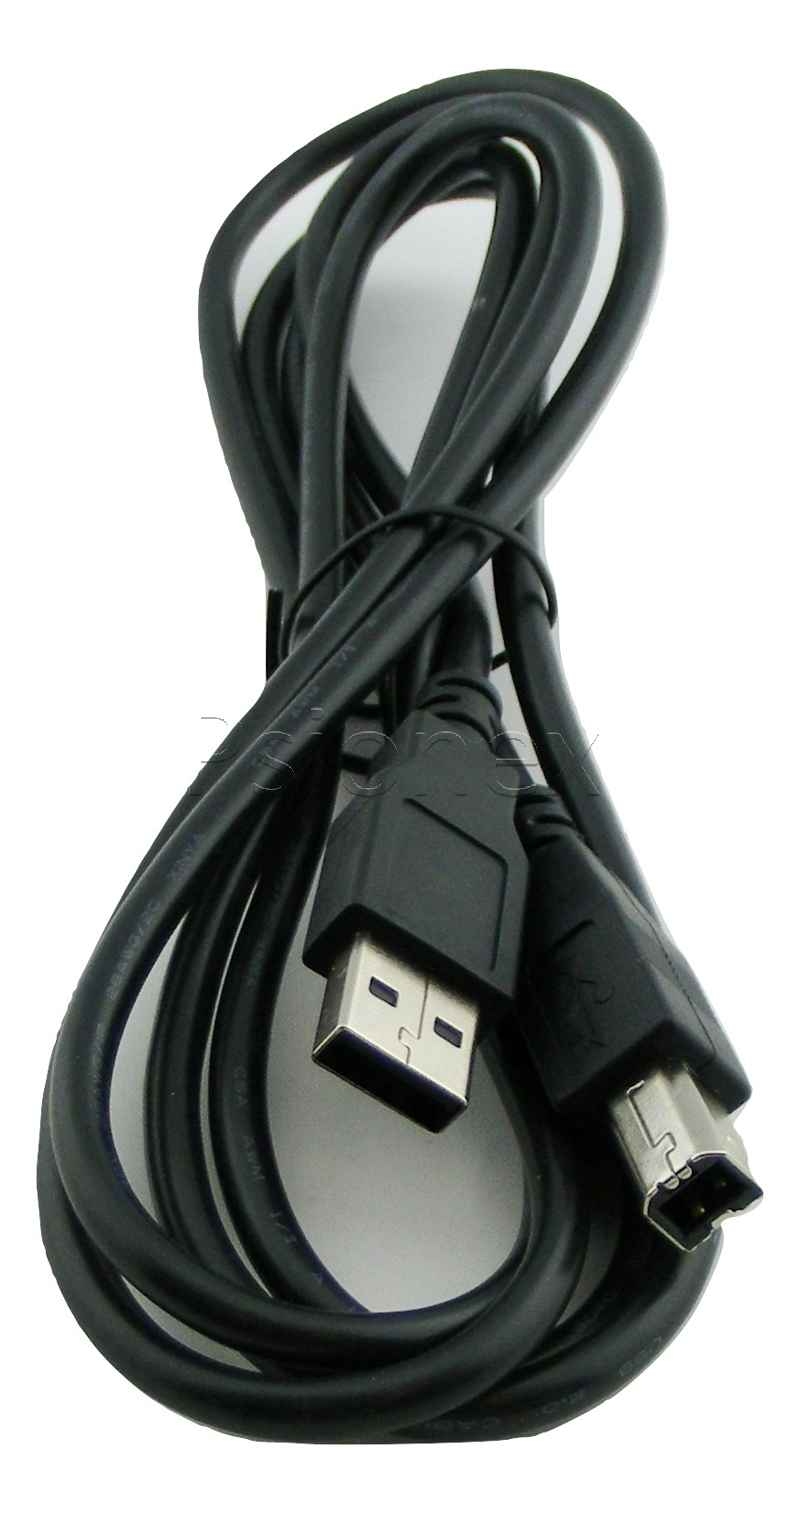 Workabout Pro 3 Adapters & Cables